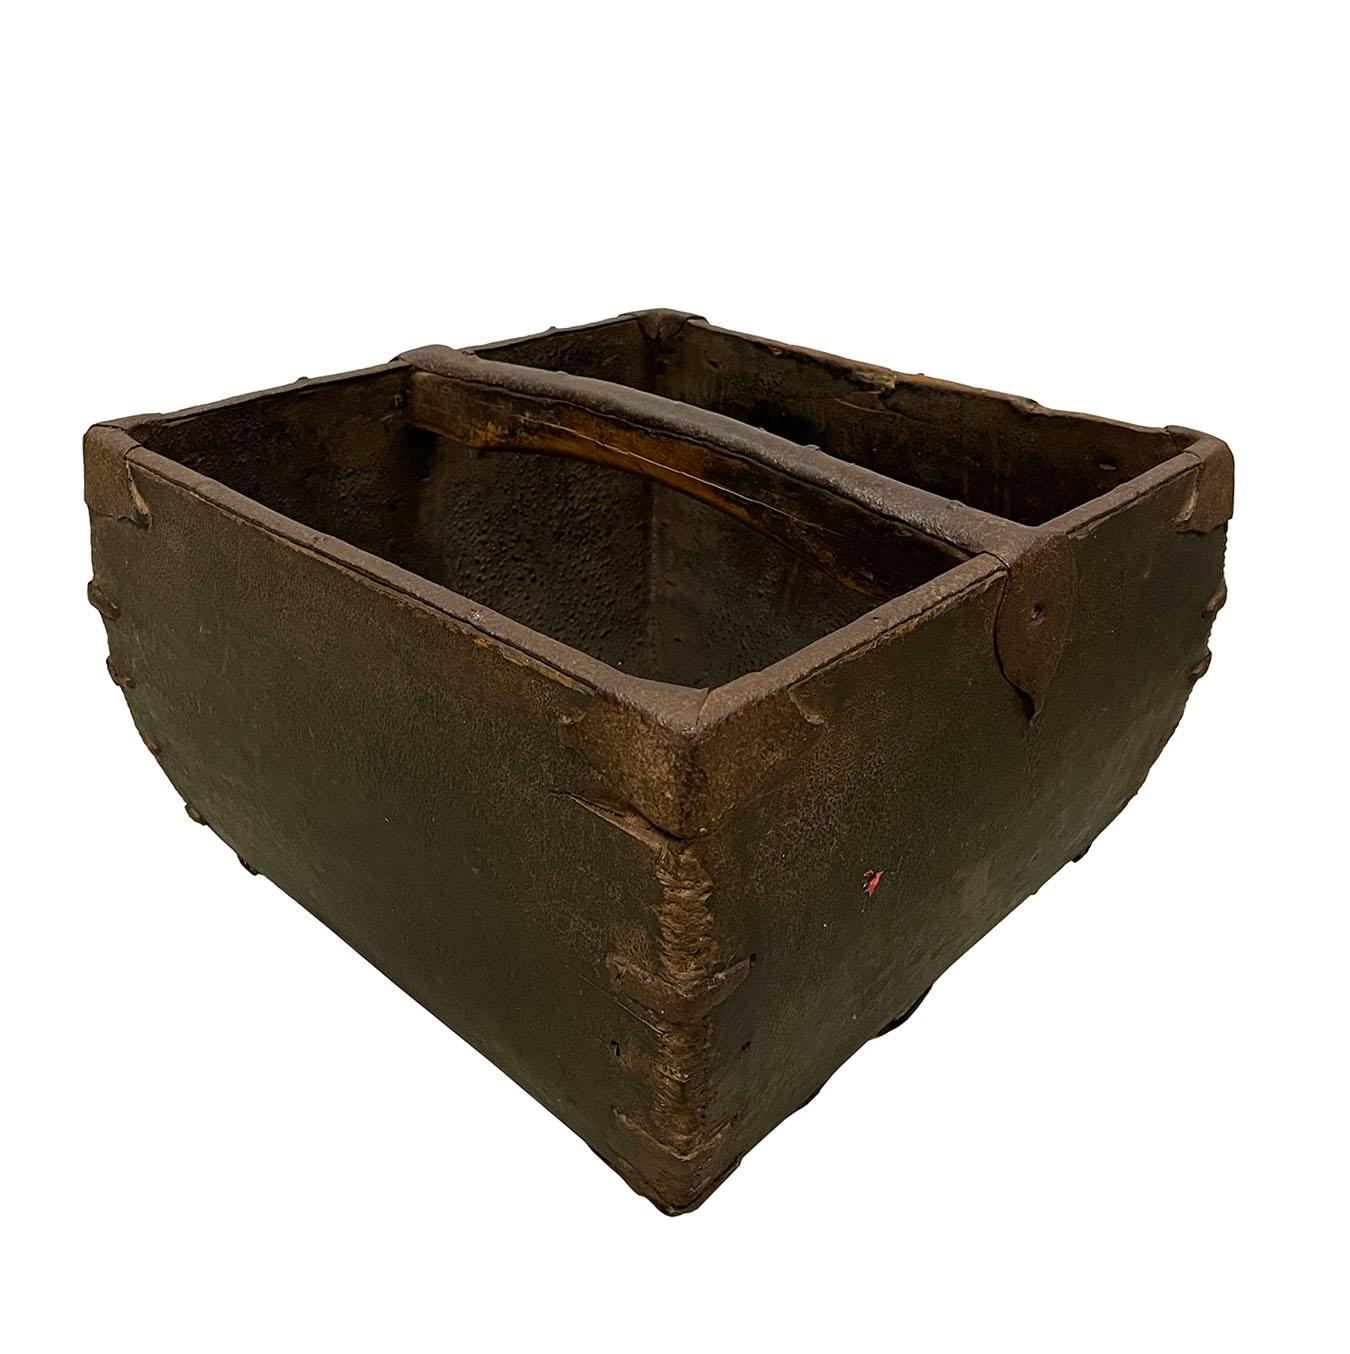 Look at this primitive Antique Chinese official wooden rice measurement bucket 